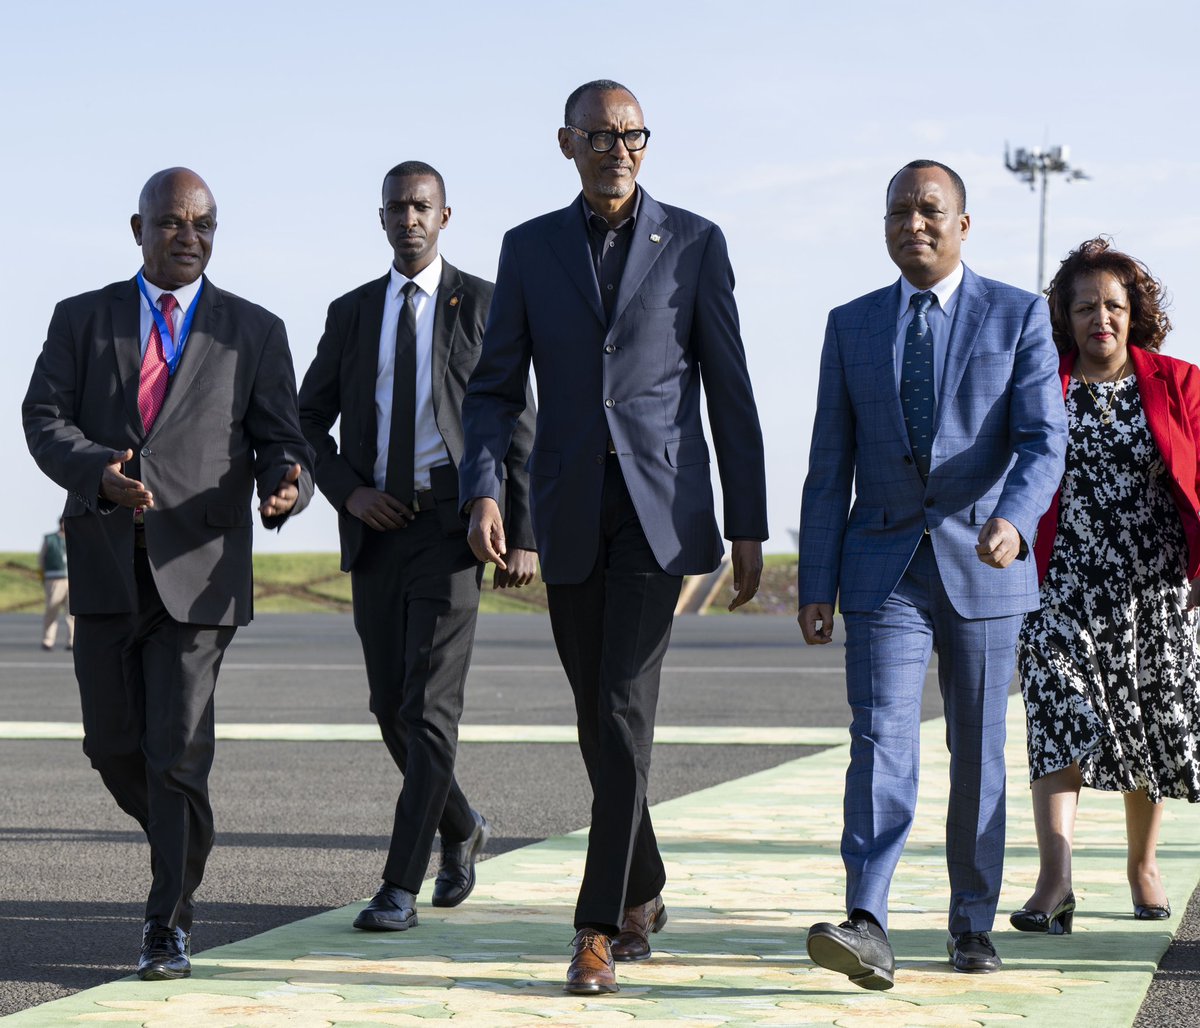 Grateful for President Kagame's tireless dedication to our country's growth. Day and night, his visionary leadership drives us forward. Thank you for inspiring us all. 🇷🇼 

#RwandaIsOpen